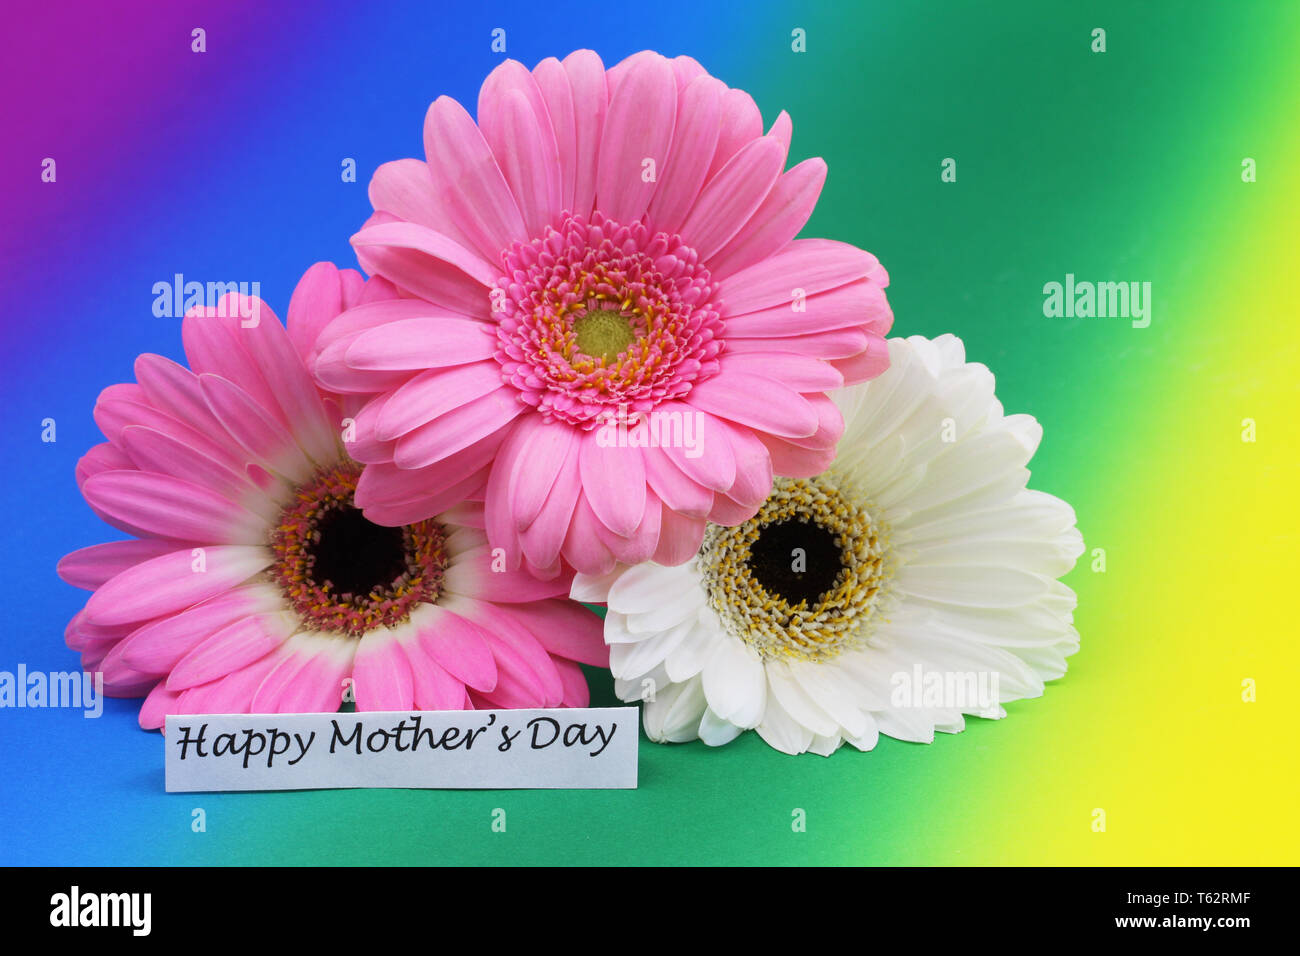 happy-mothers-day-card-with-three-gerbera-daisies-on-rainbow-coloured